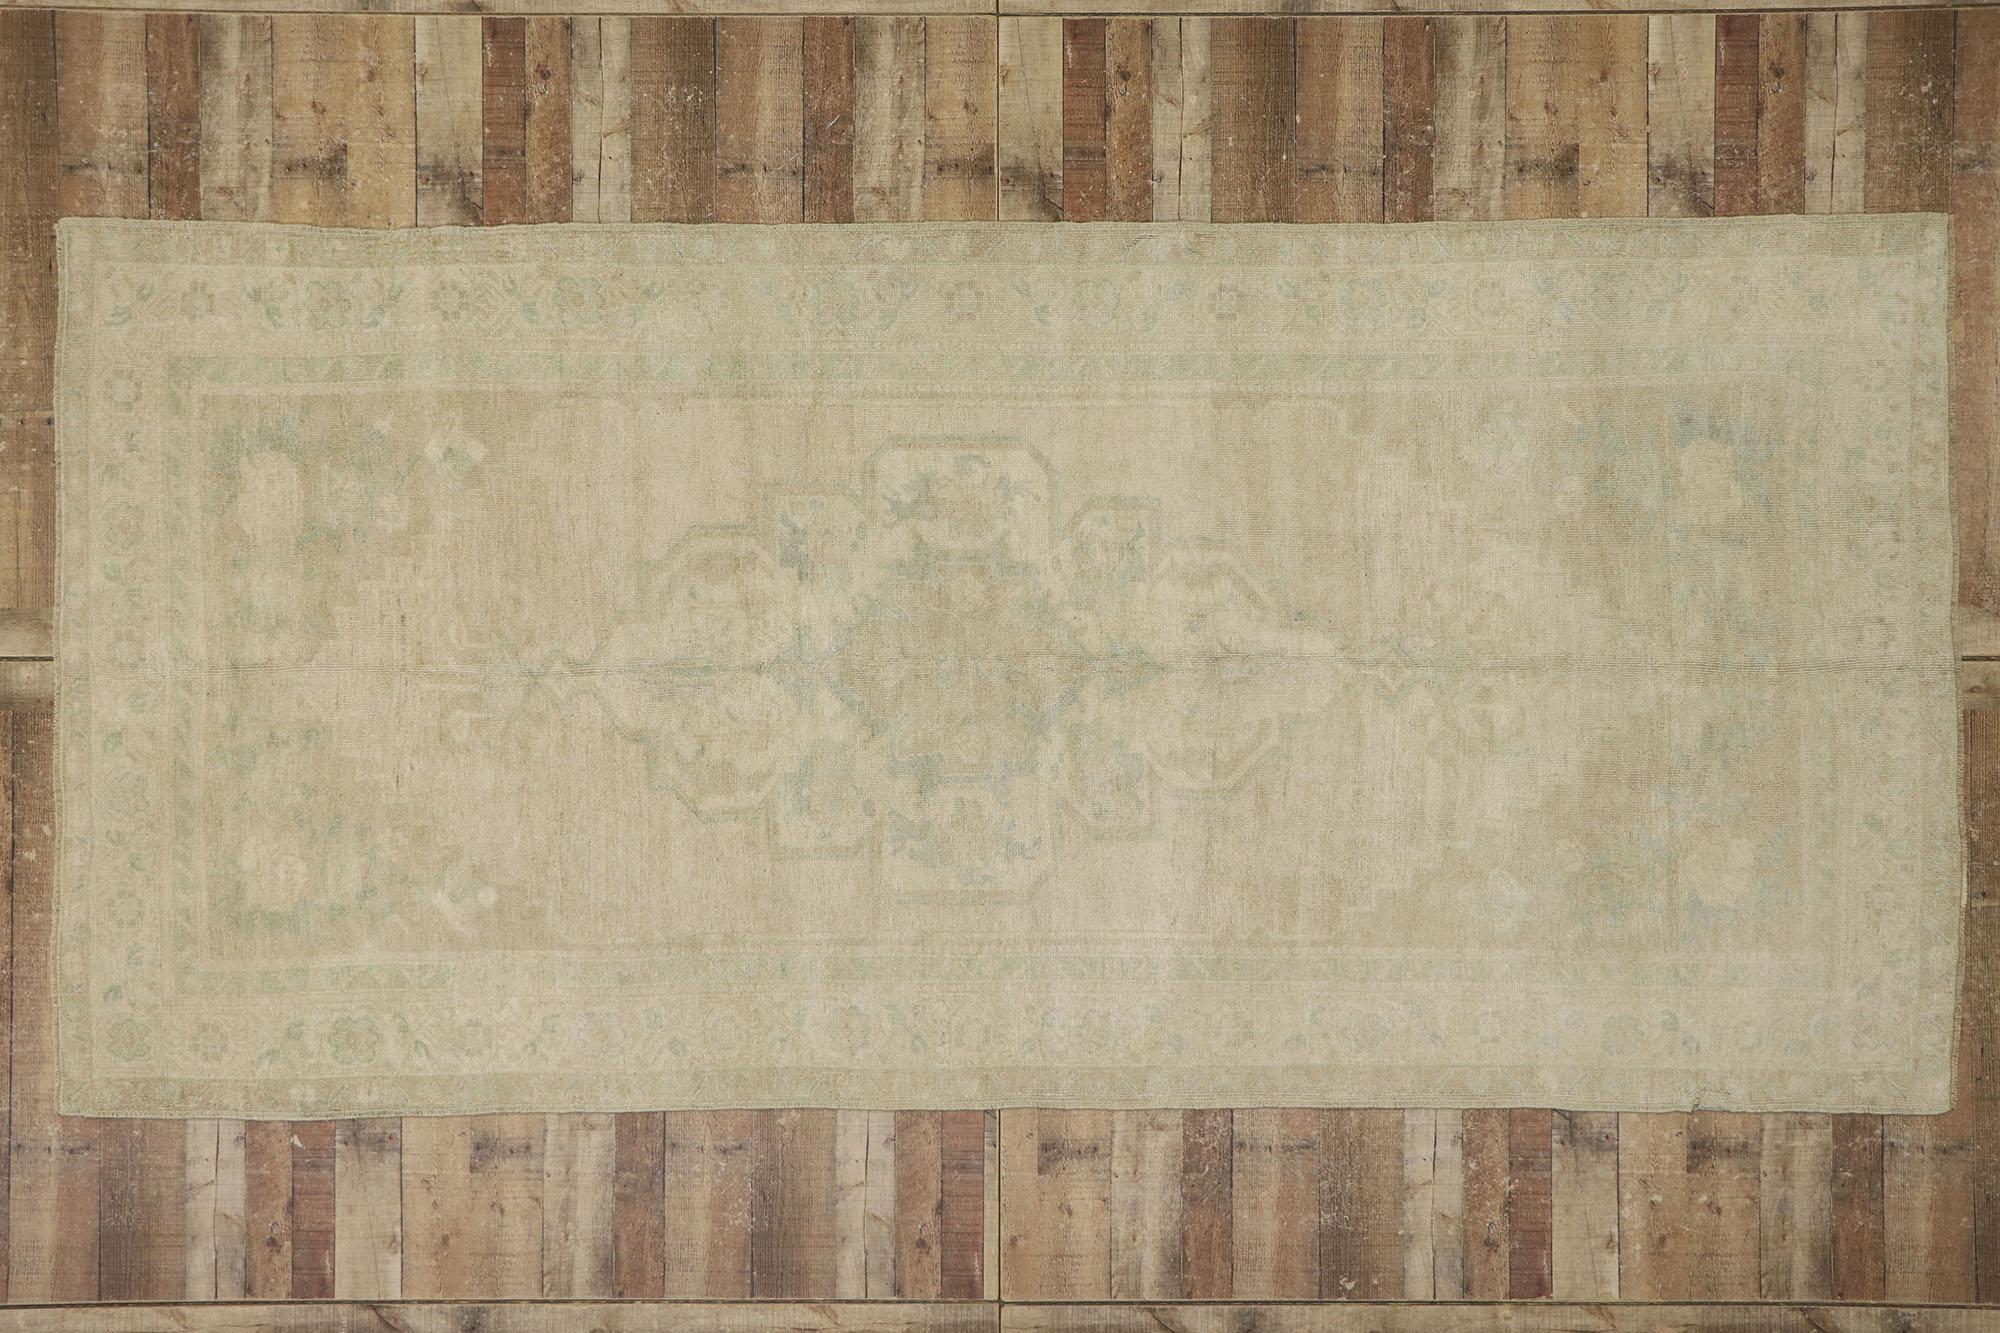 Vintage Turkish Oushak Gallery Rug with Modern Farmhouse Style For Sale 1